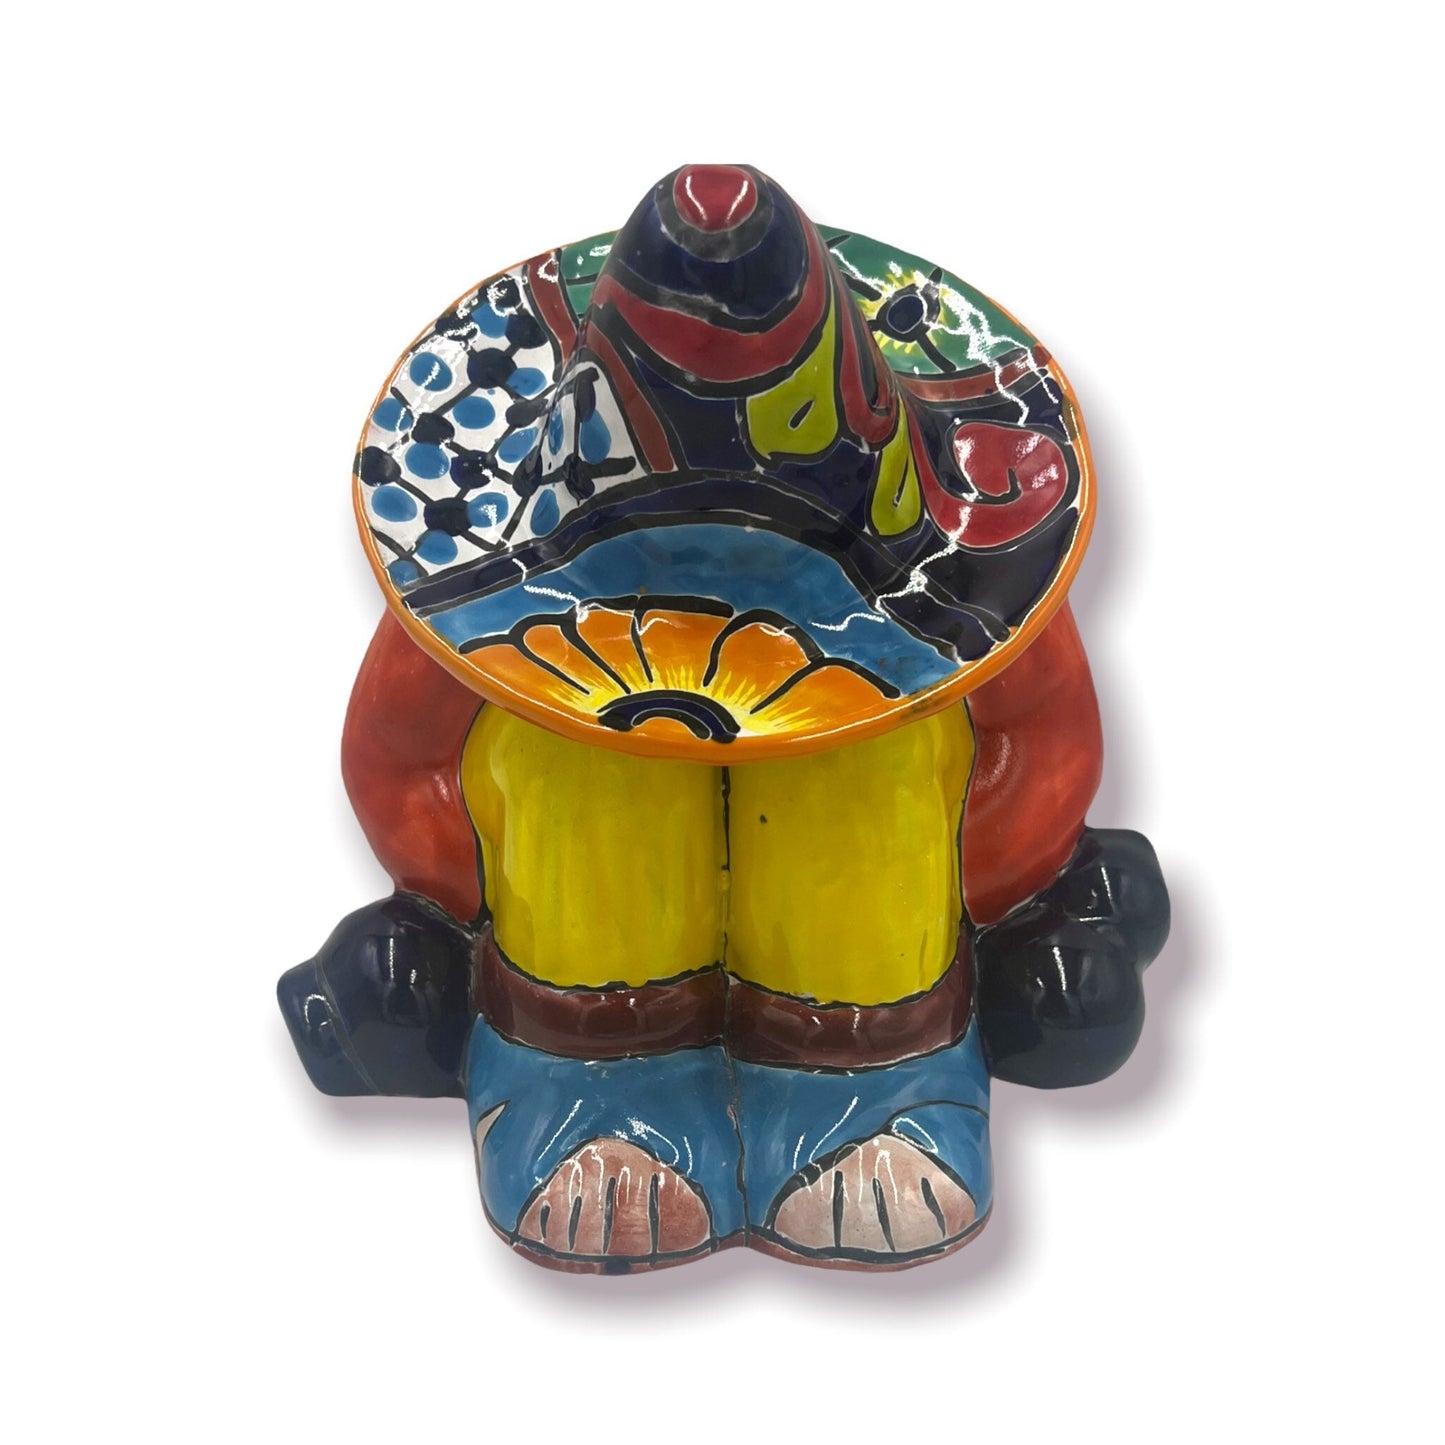 Colorful Handmade Talavera Canister | Sleeping Panchito Mexican Pottery